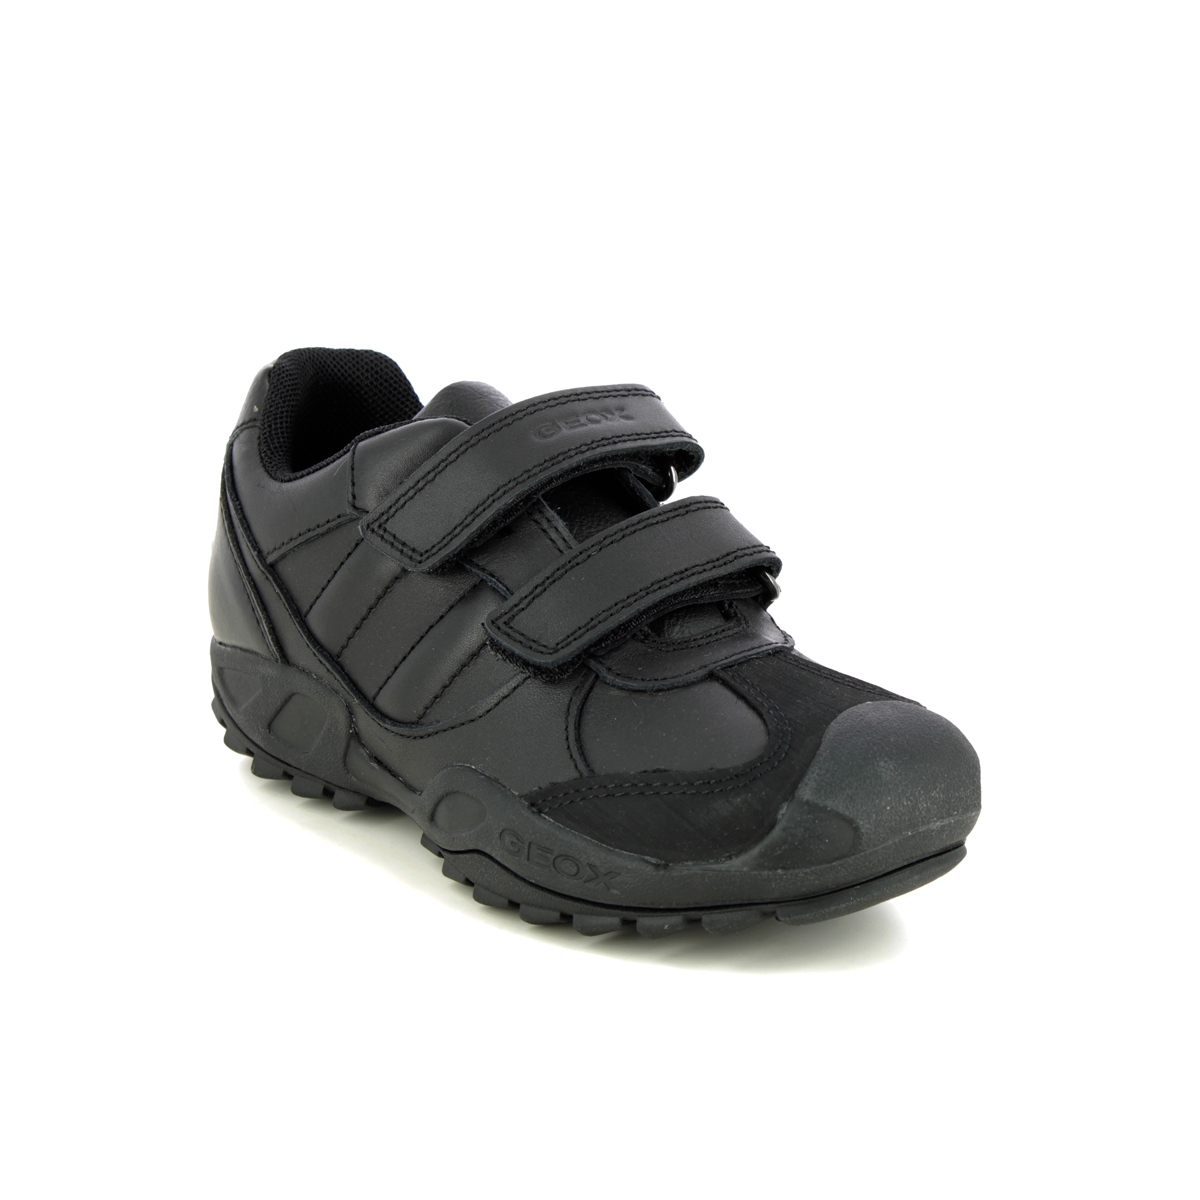 Geox Savage Low Cut Black leather Kids Boys Shoes J841VB-C9999 in a Plain Leather in Size 39